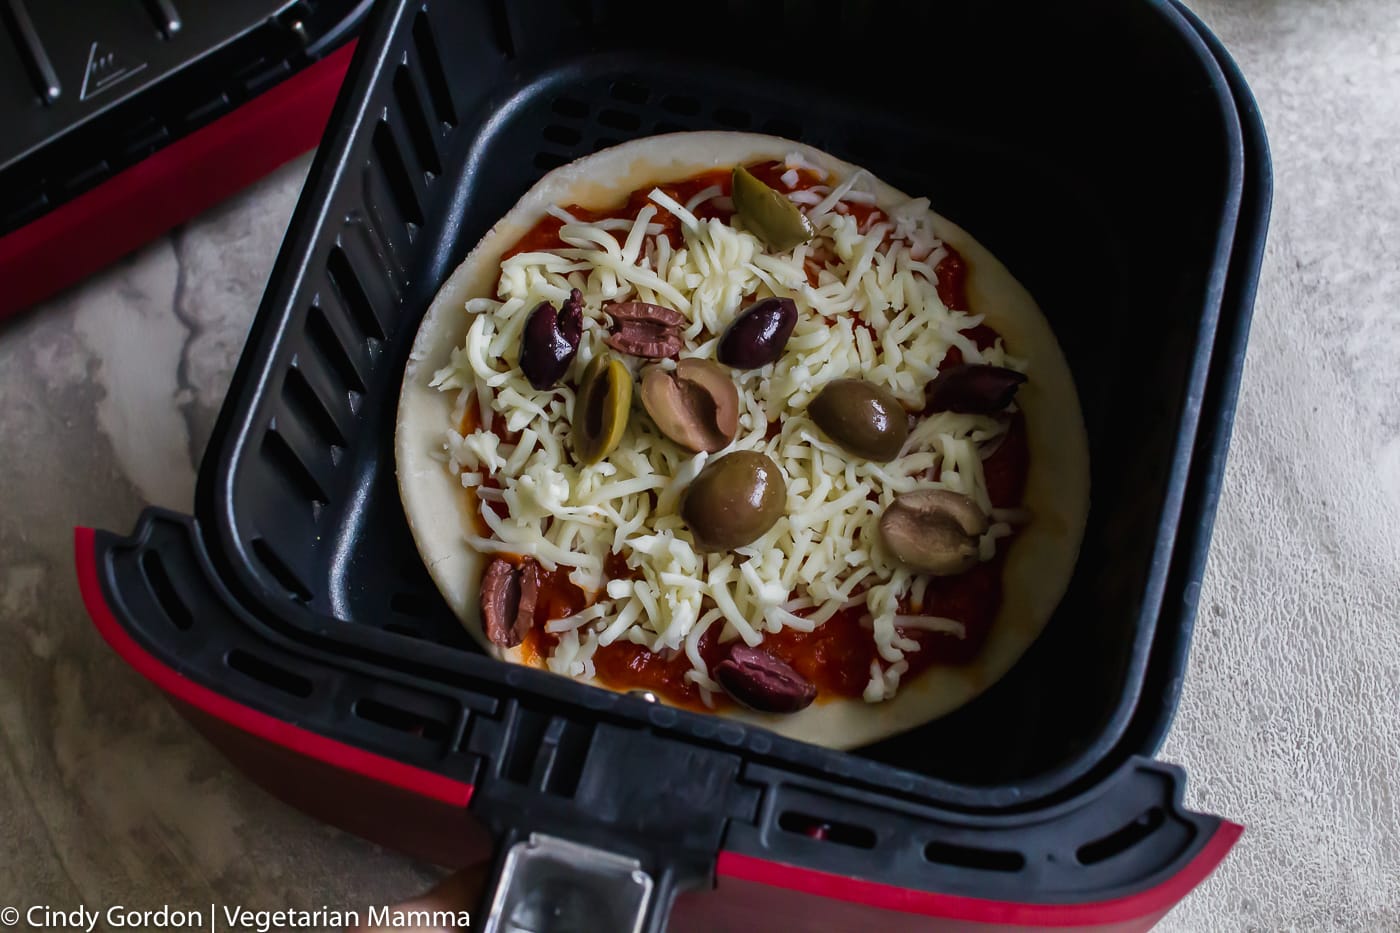 uncooked pizza in an air fryer